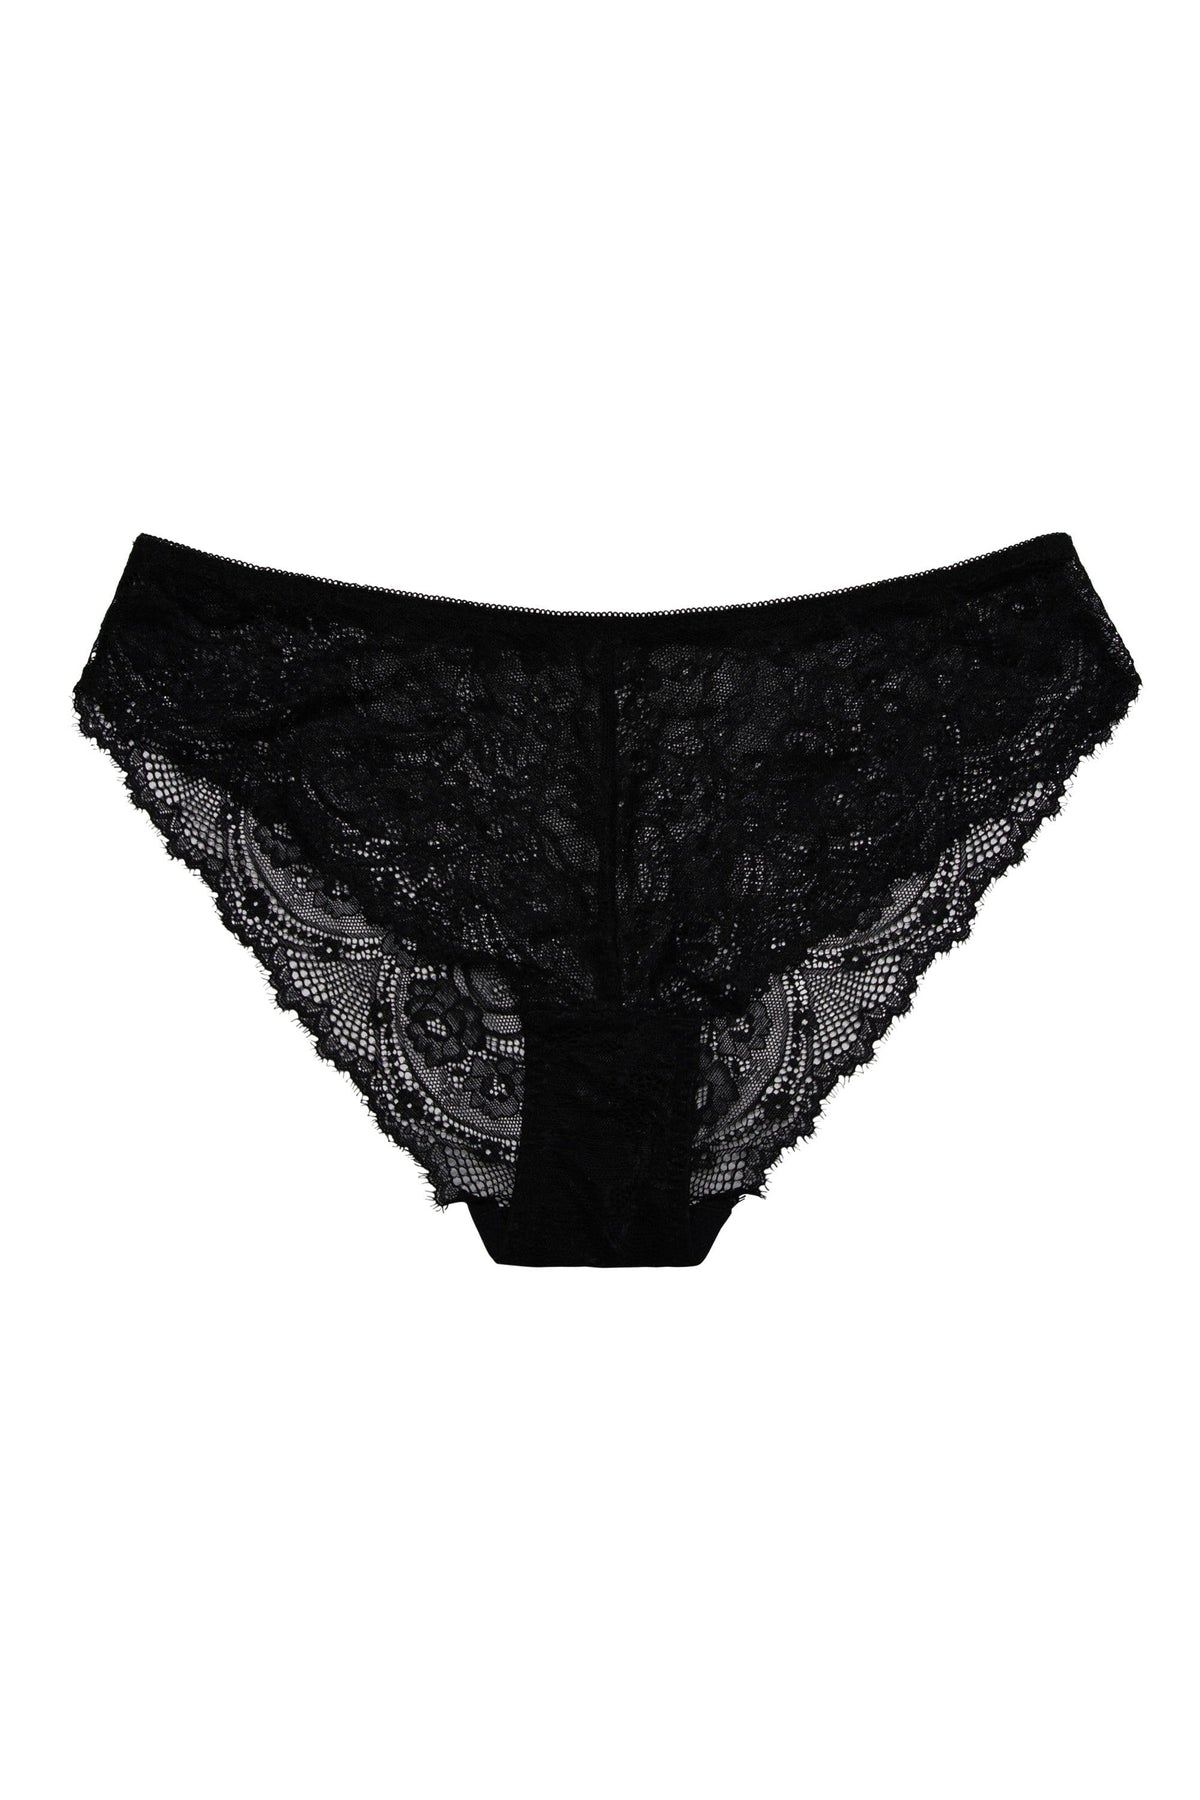 Passion Panties with Easy Access 'Verita thong', black